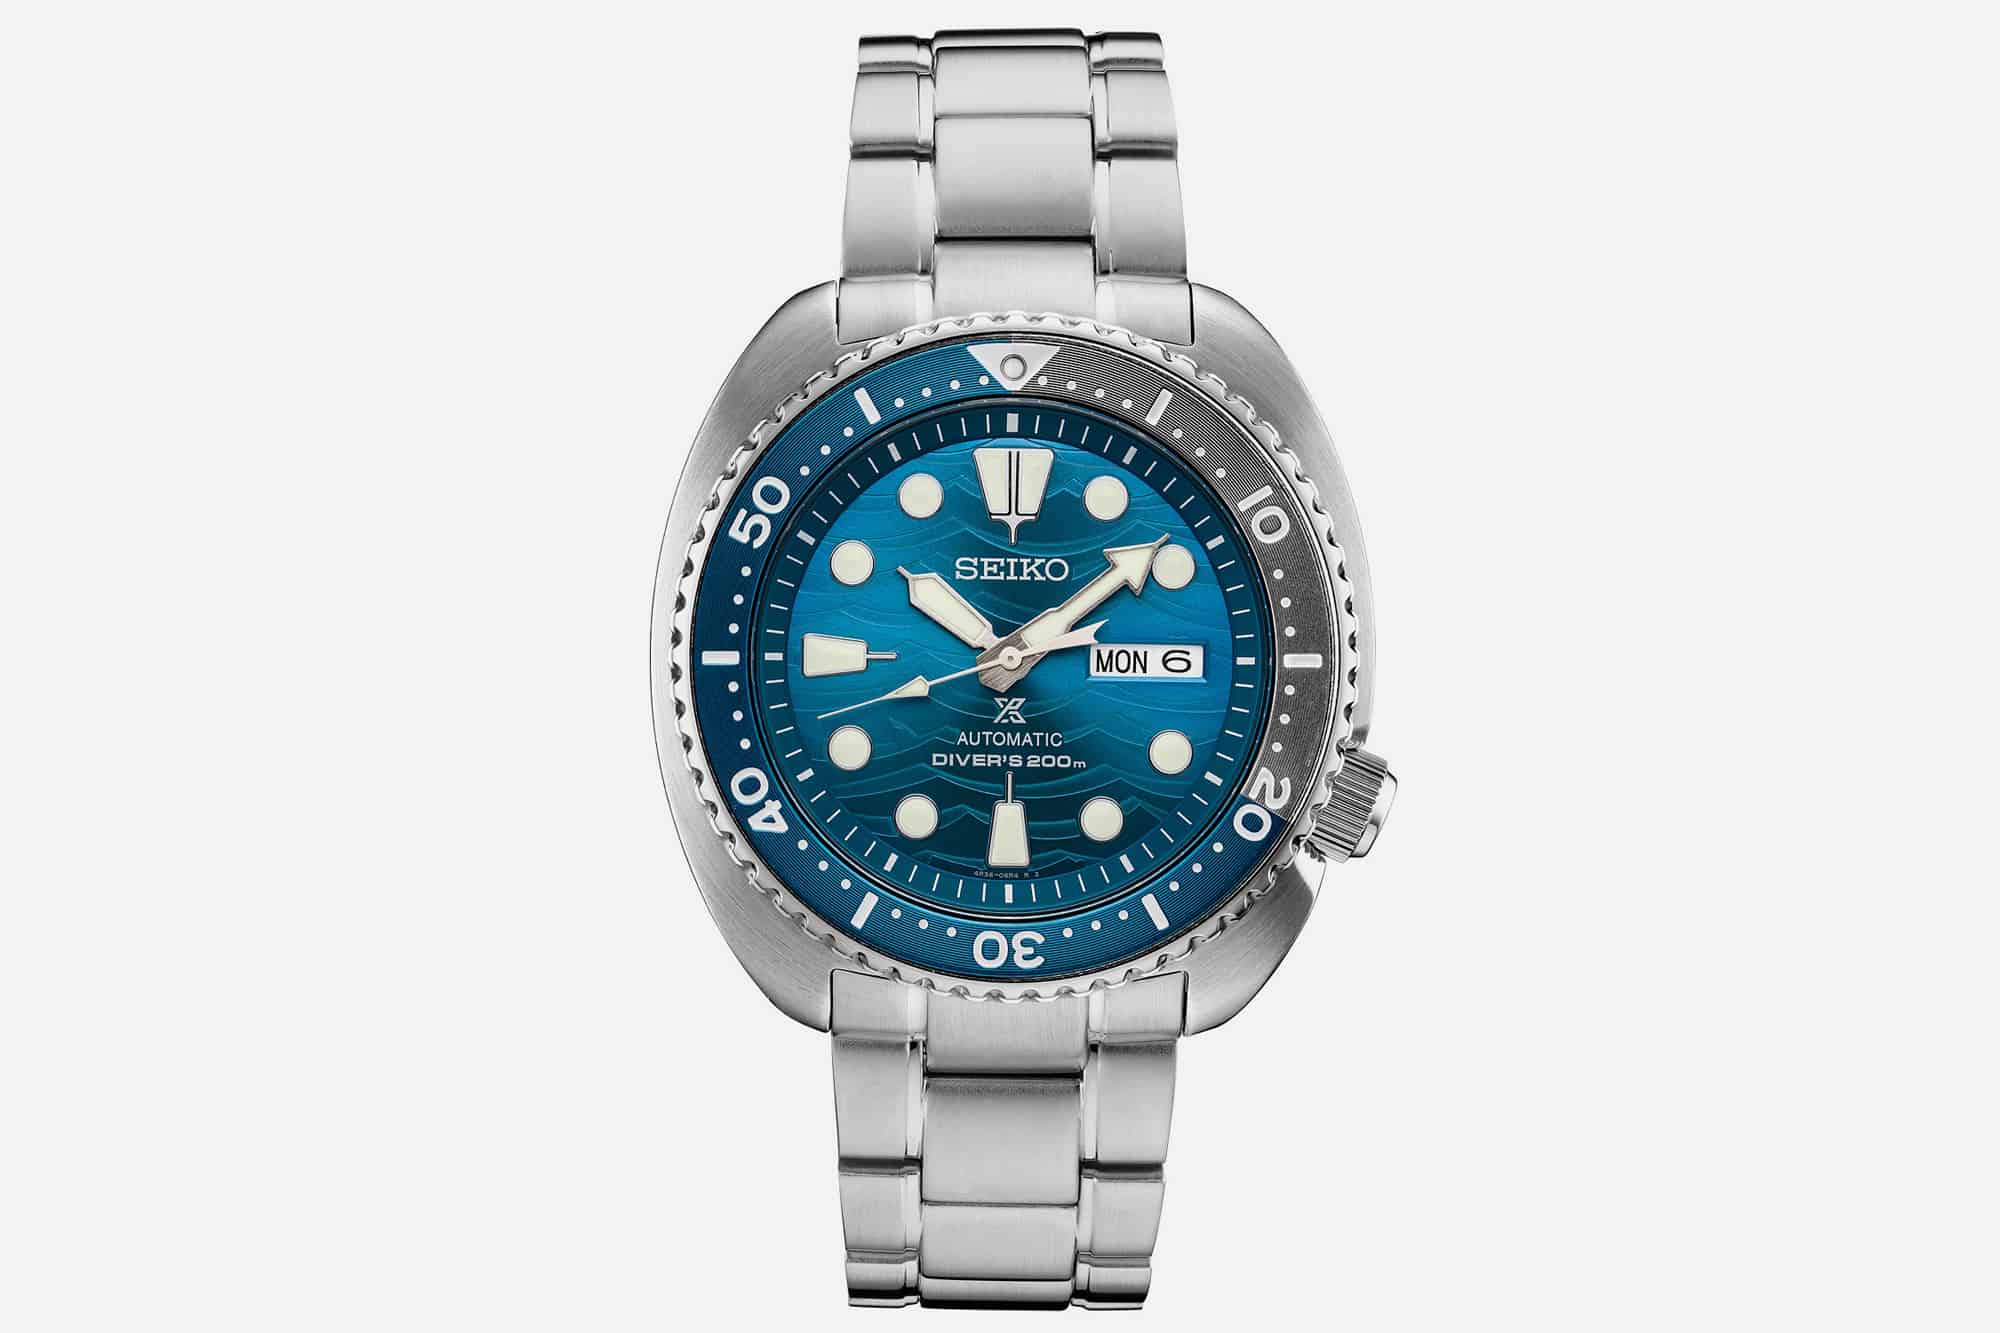 Introducing the Seiko “Save the Ocean” Turtle Ref. SRPD21 and Samurai Ref. SRPD23